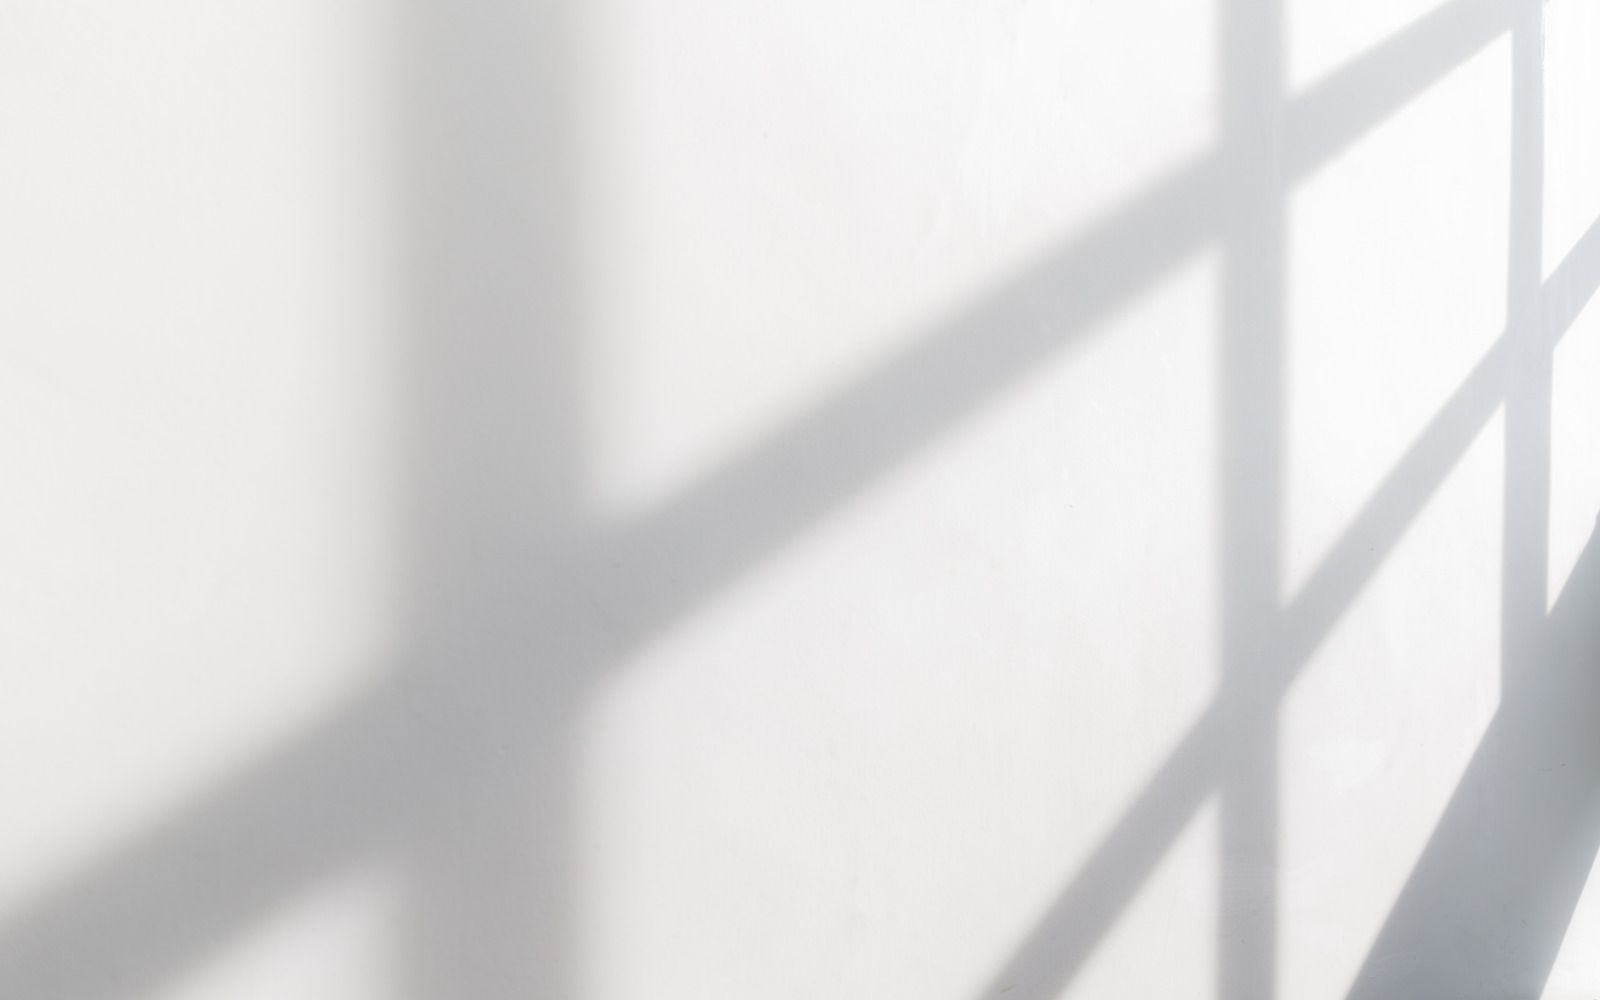 Shadows of a window against a white wall.